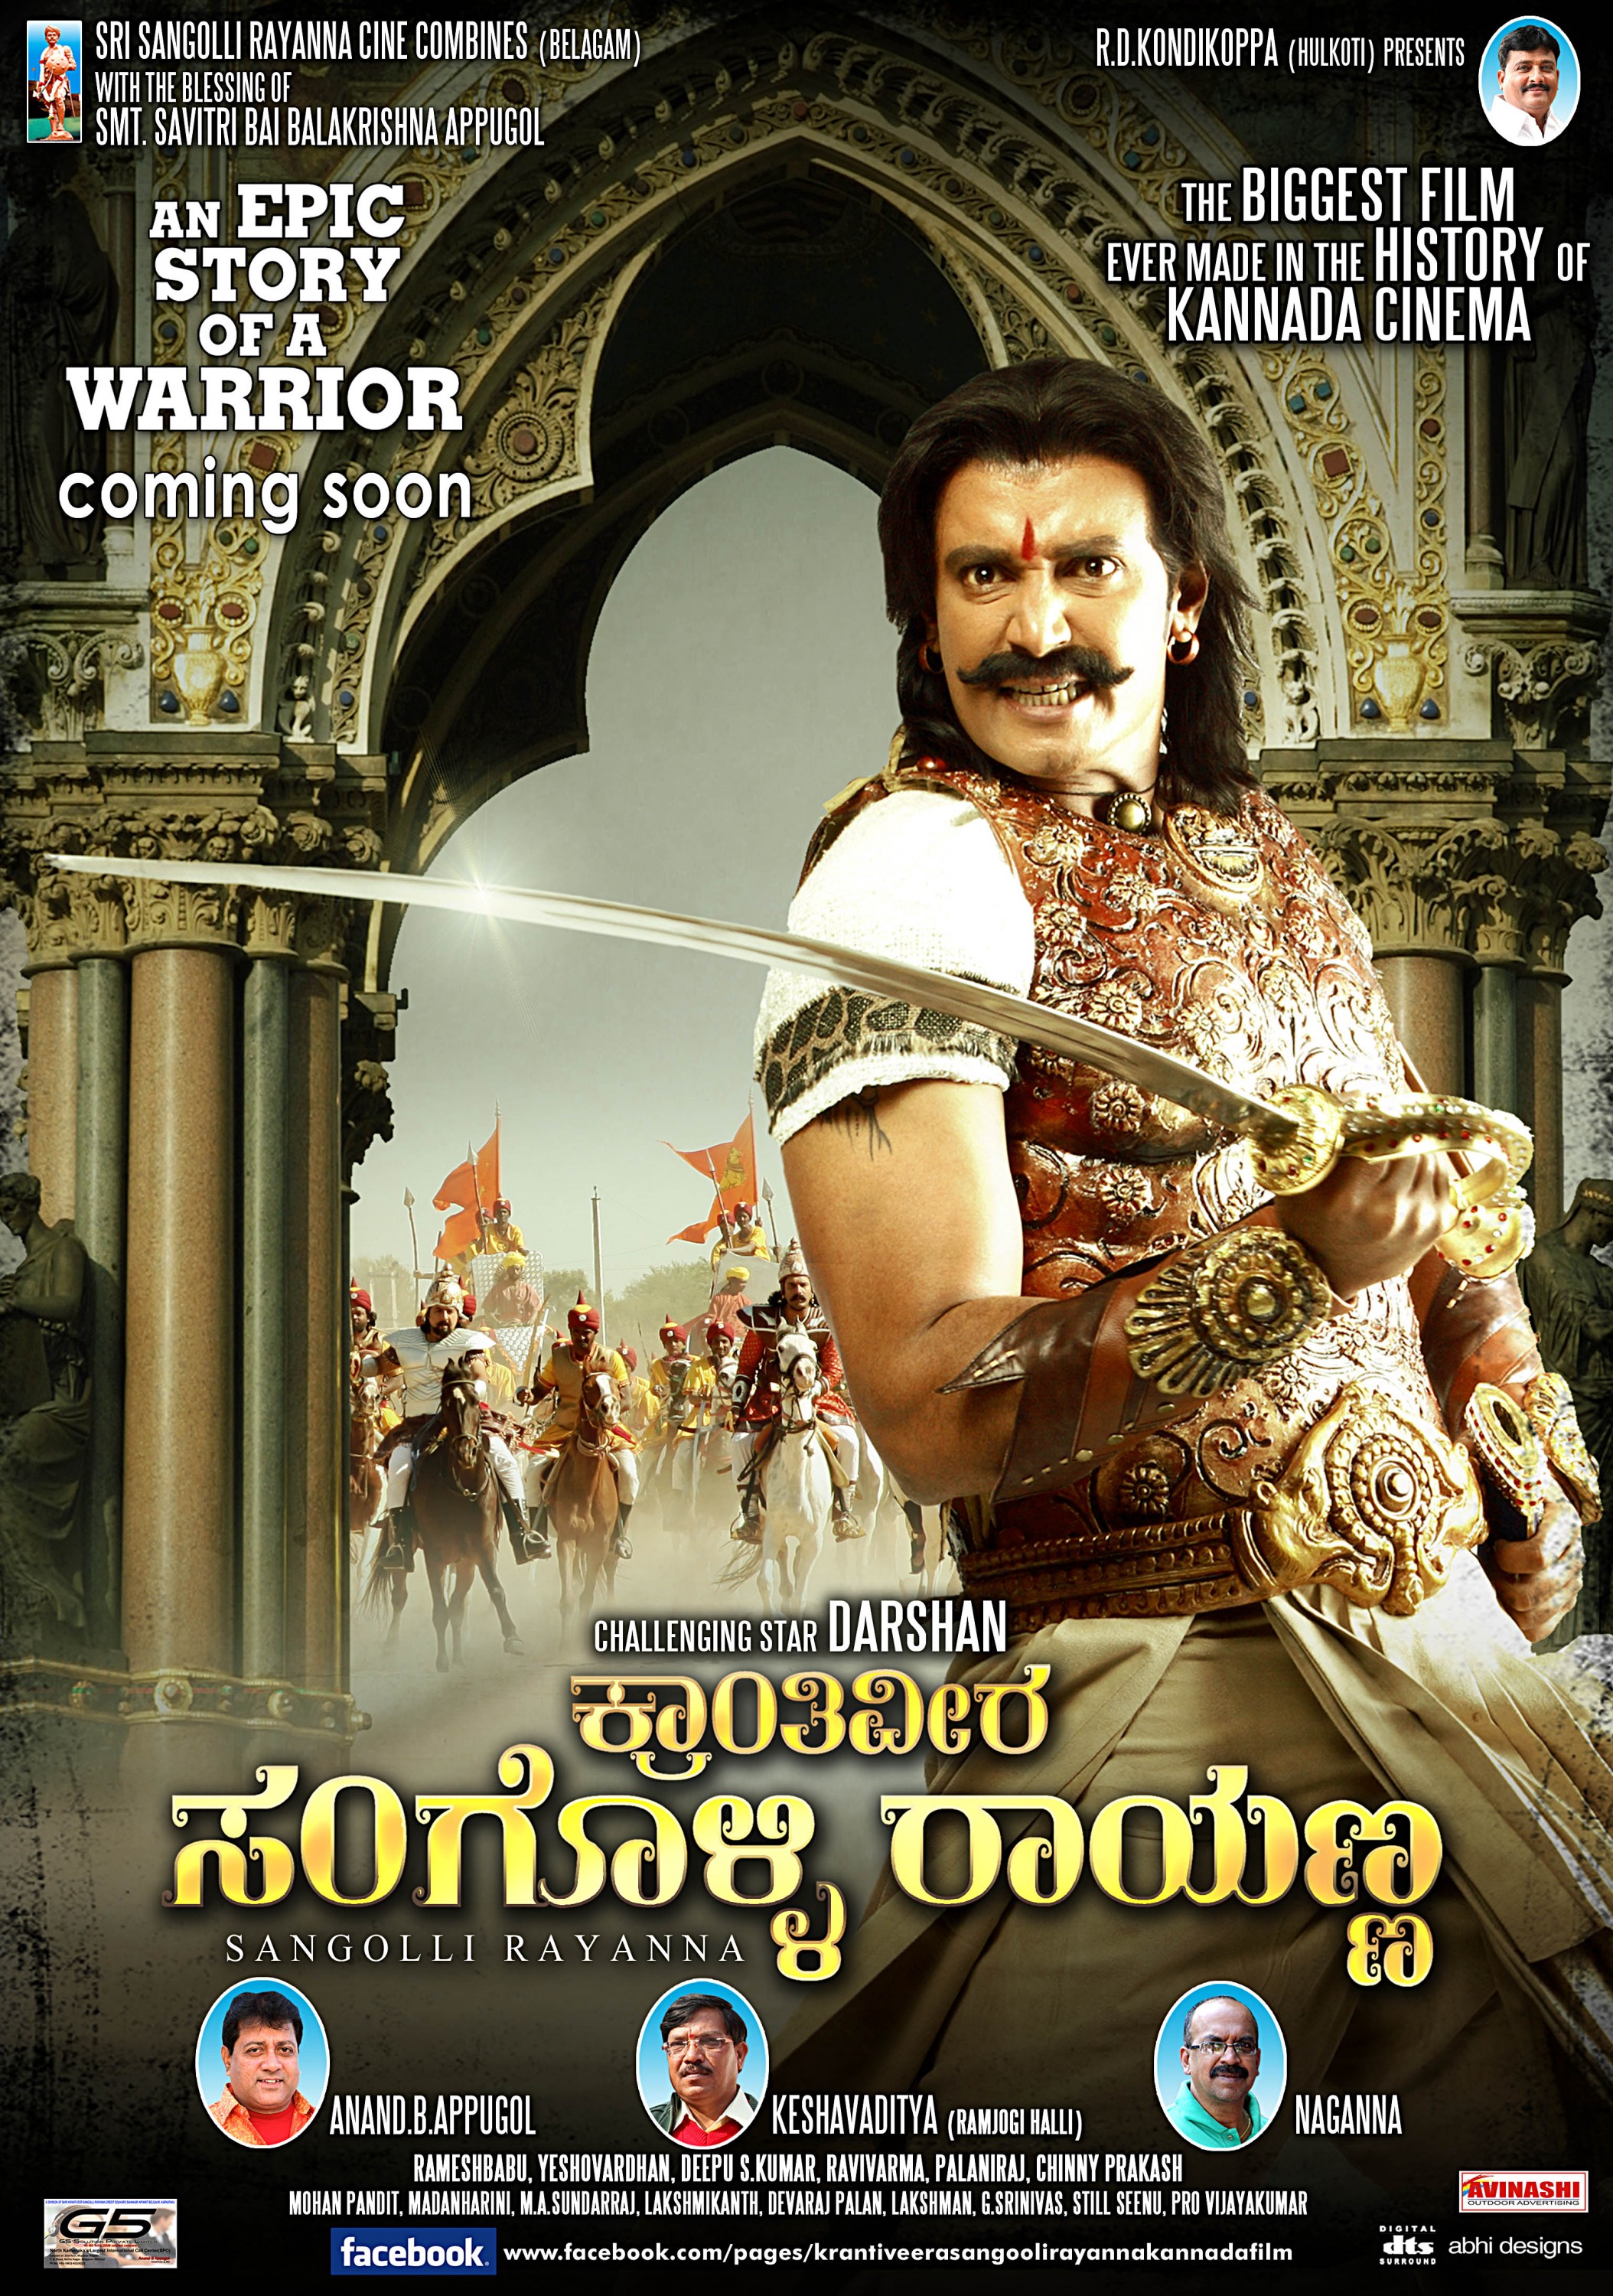 Mega Sized Movie Poster Image for Sangolli Rayanna (#28 of 79)